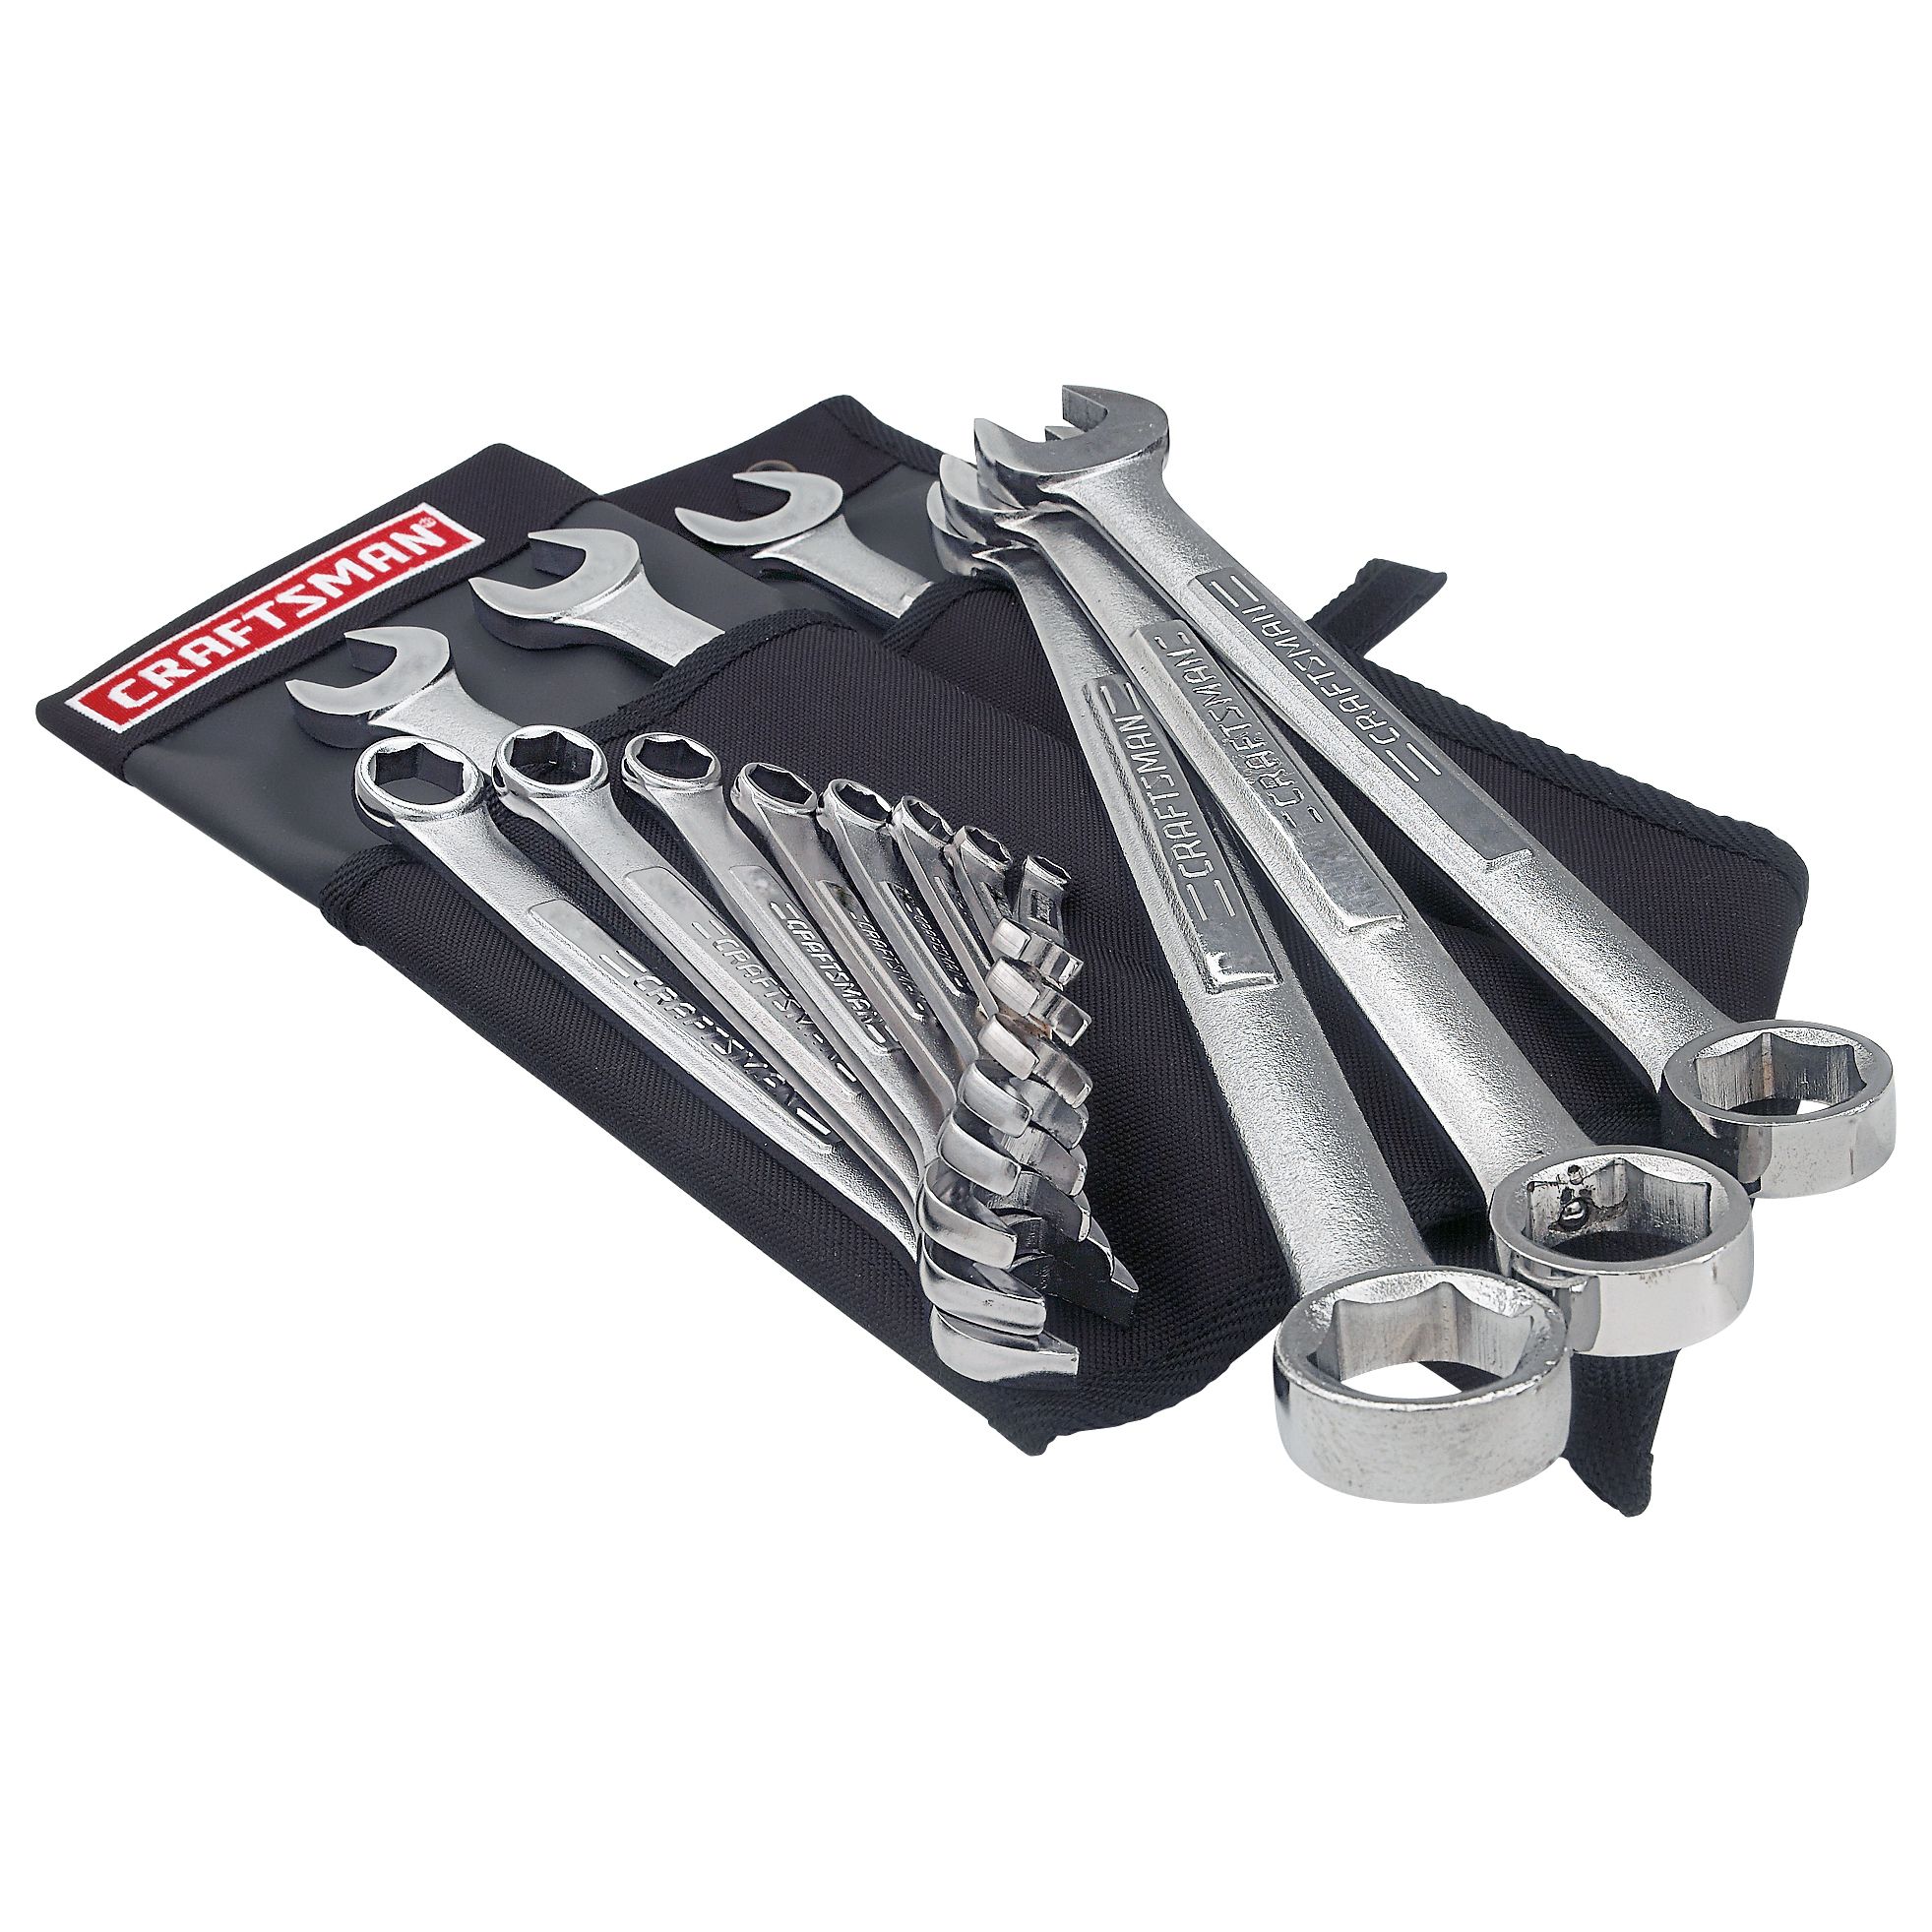 Craftsman 14 pc. Metric 6 pt. Combination Wrench Set with Deluxe Roll Pouch